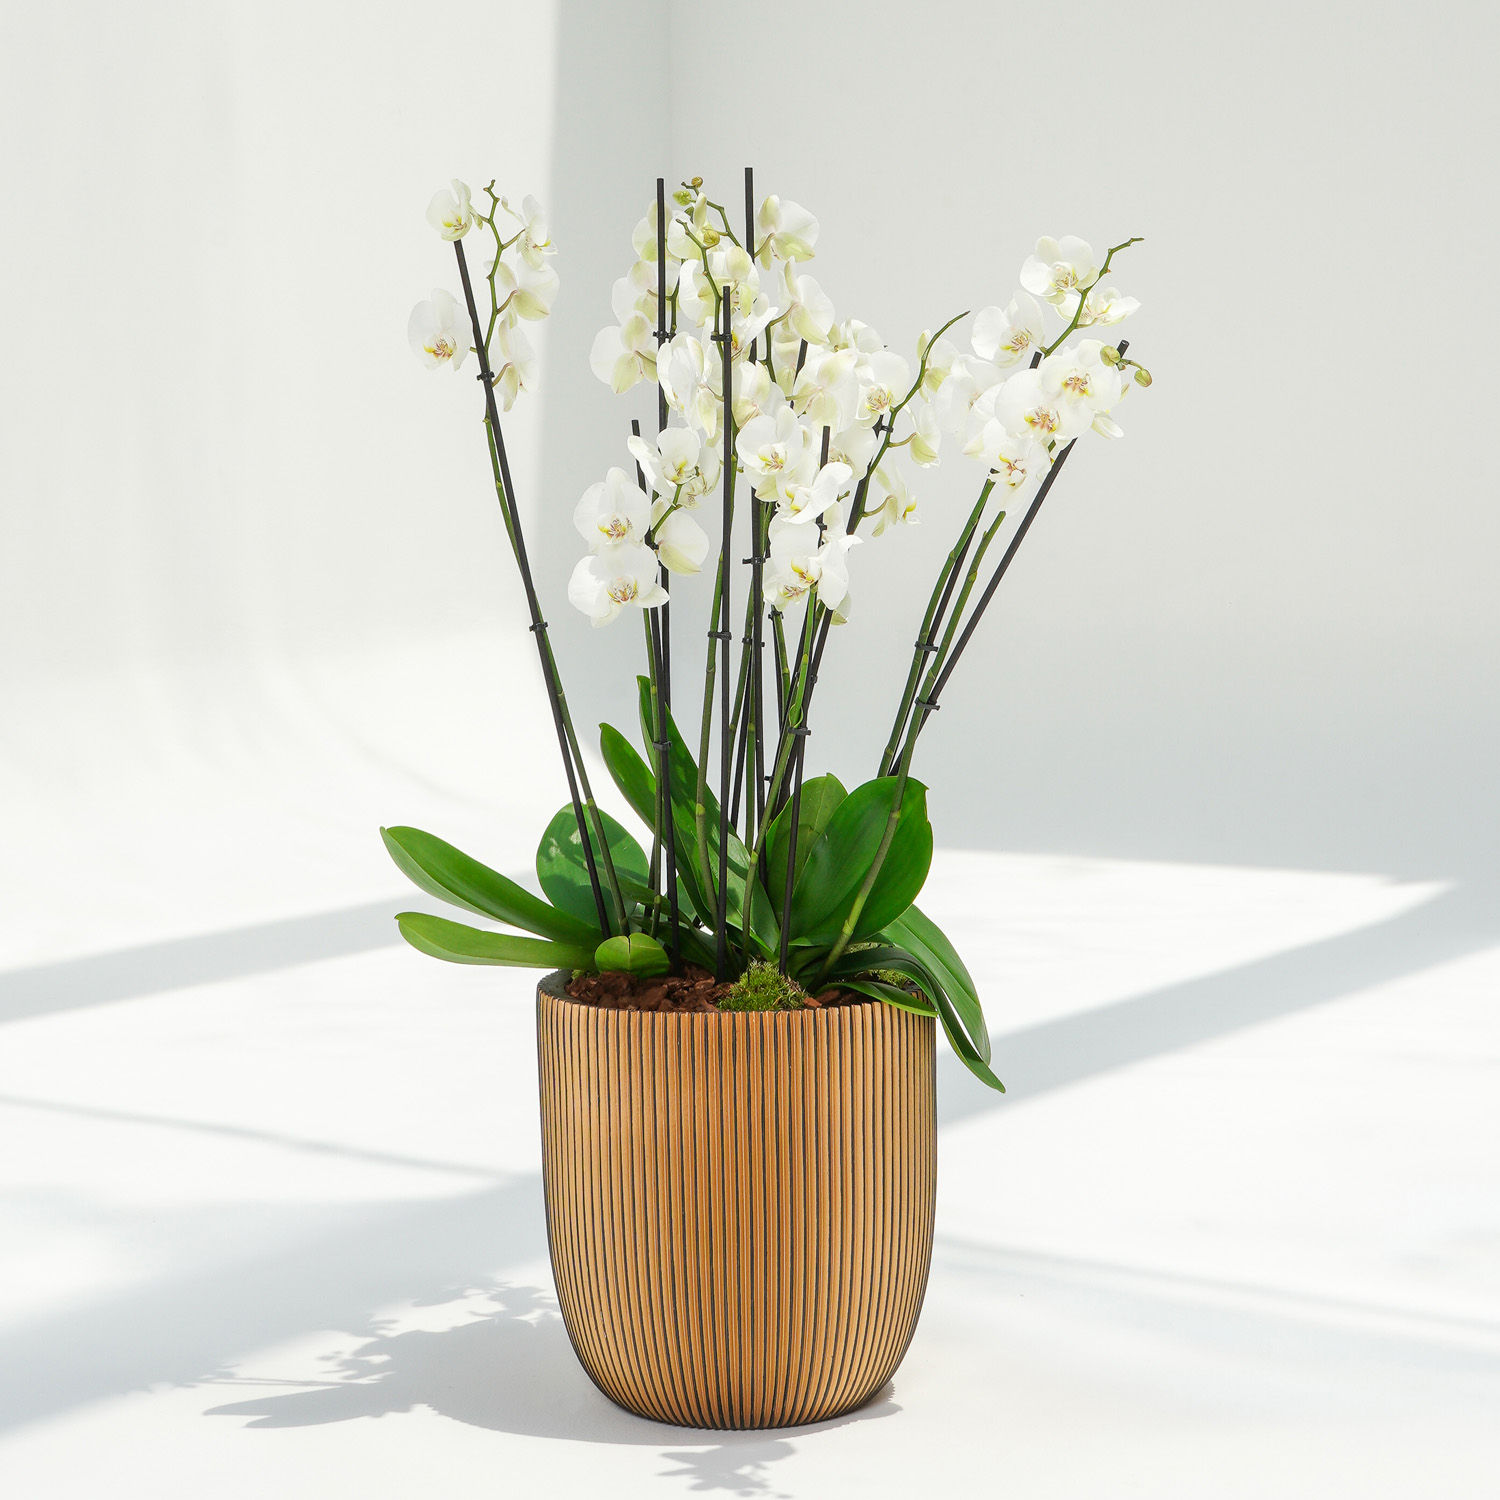 Online Holland Orchid 12 Stem in Premium Planter Gift Delivery in UAE - FNP